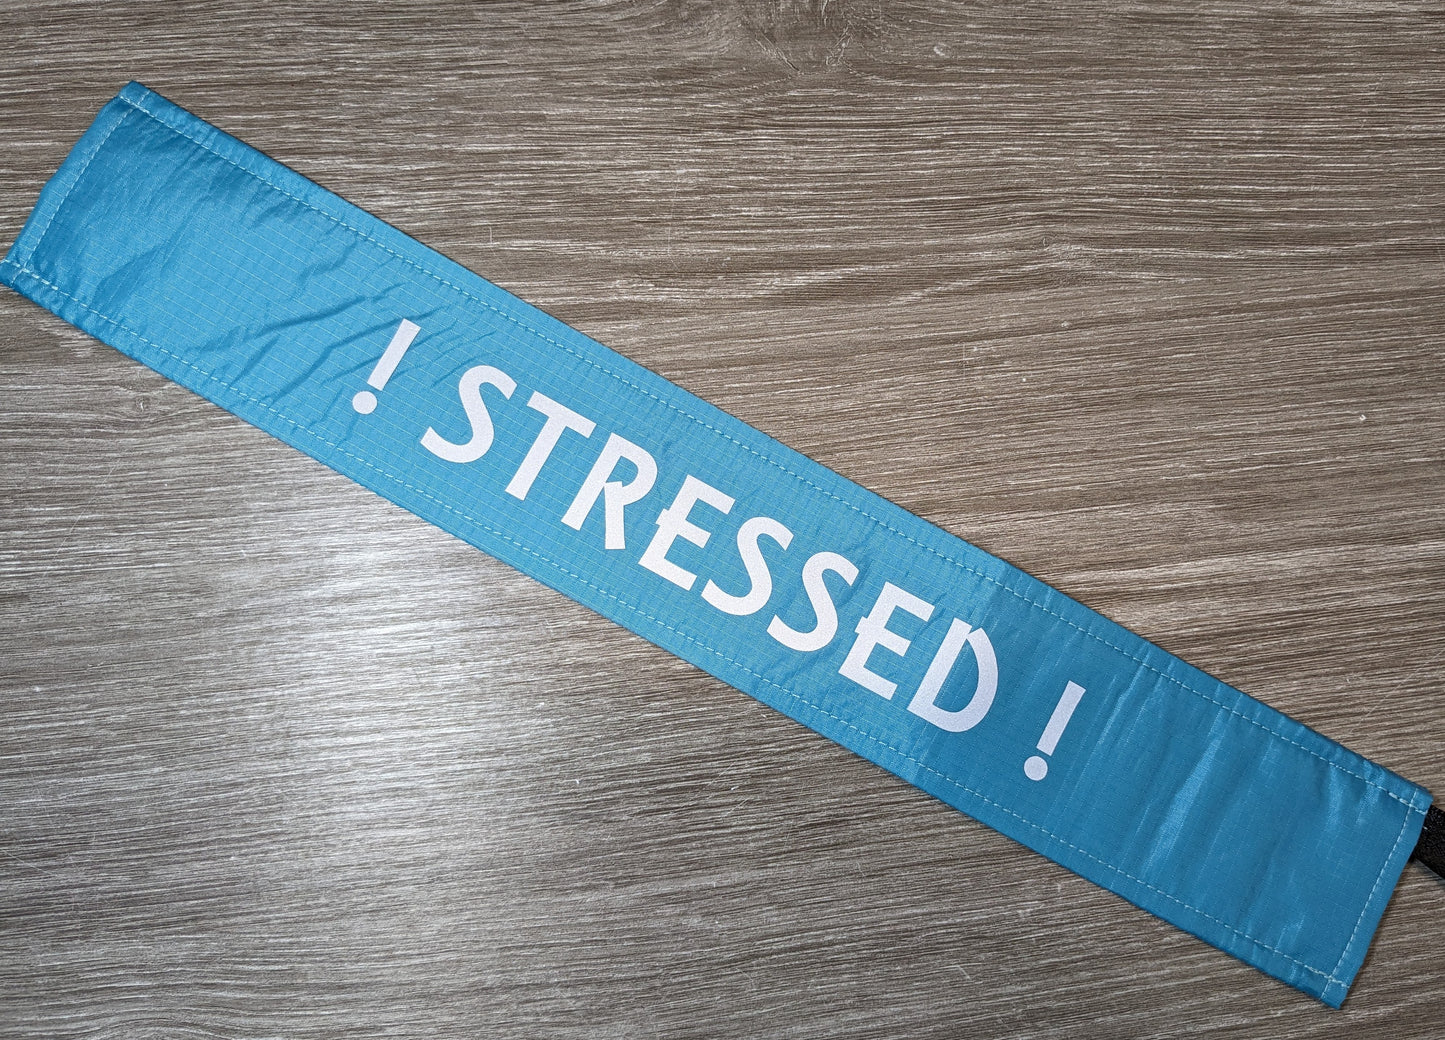 "STRESSED" Dog lead sleeve. 4 colours available.  Cover for dog leash - canine training - puppy socialising - stressed stressing stressy dog (or handler!)